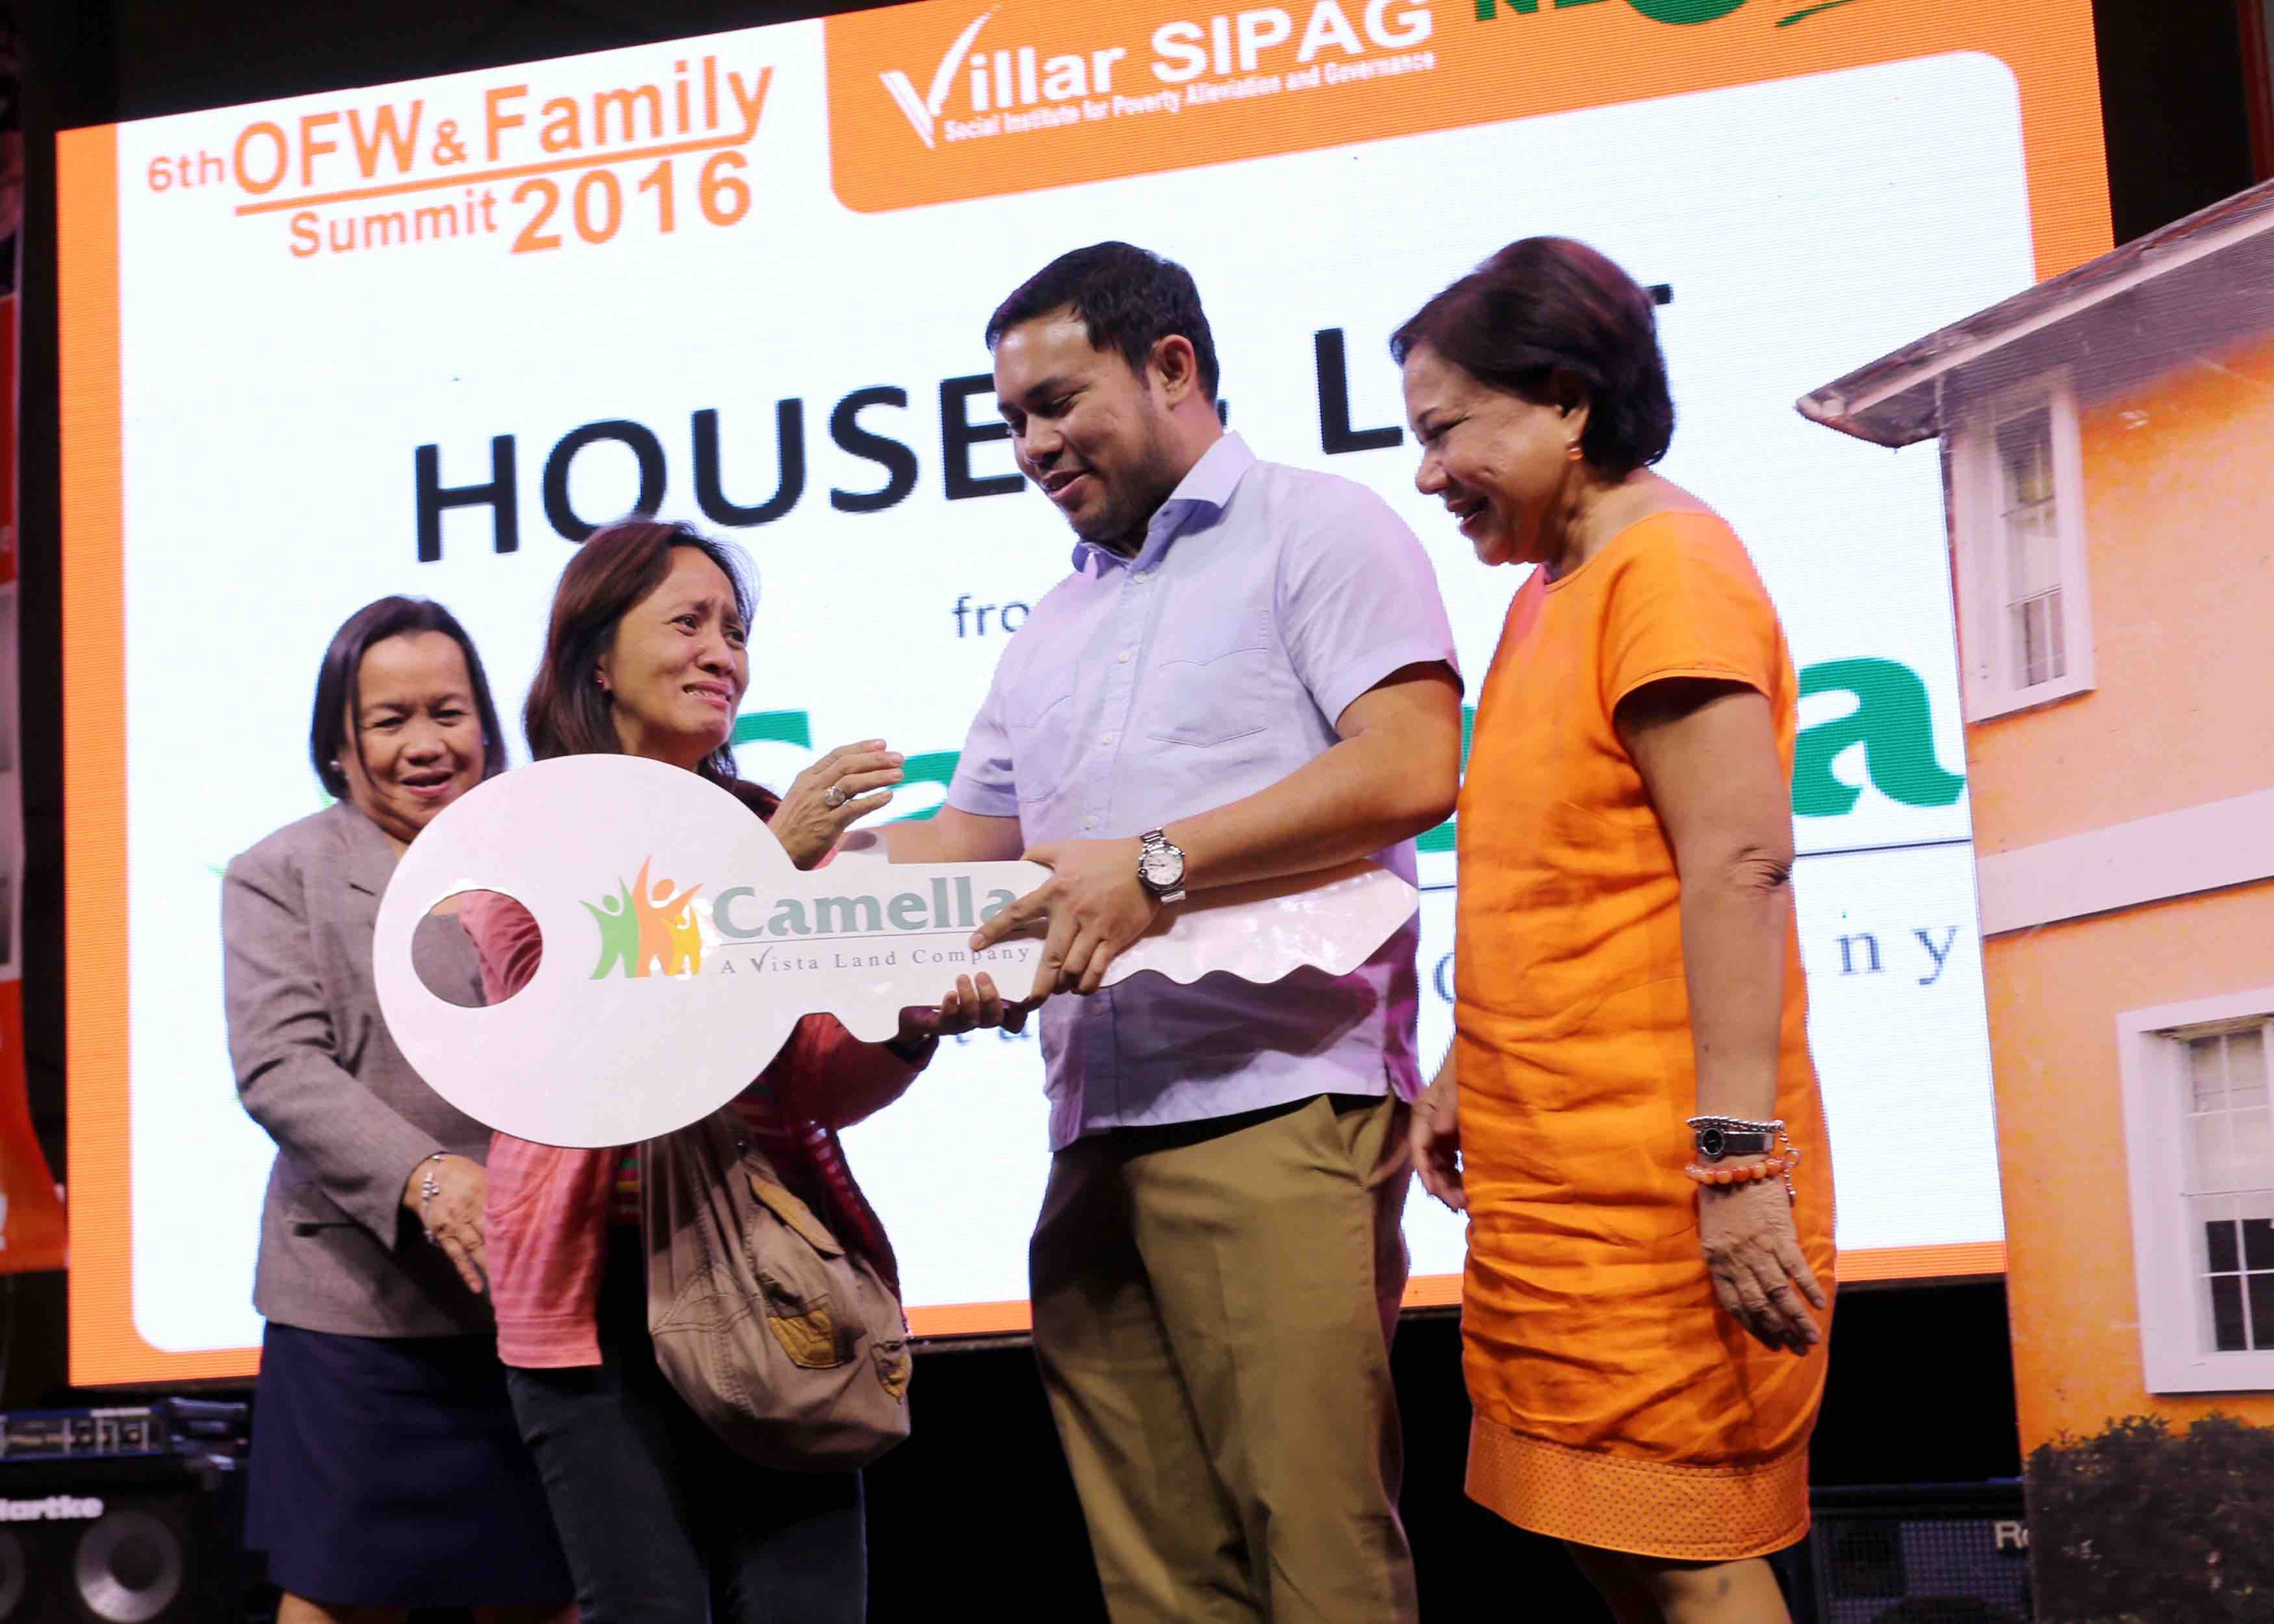 HOUSE AND LOT. Senator Villar and son DPWH Secretary Mark Villar hand over the ceremonial key to a lucky OFW after winning a new house and lot from Camella Homes during Villar SIPAG’s 6th OFW and Family Summit in Manila. Photo from Villar's office  